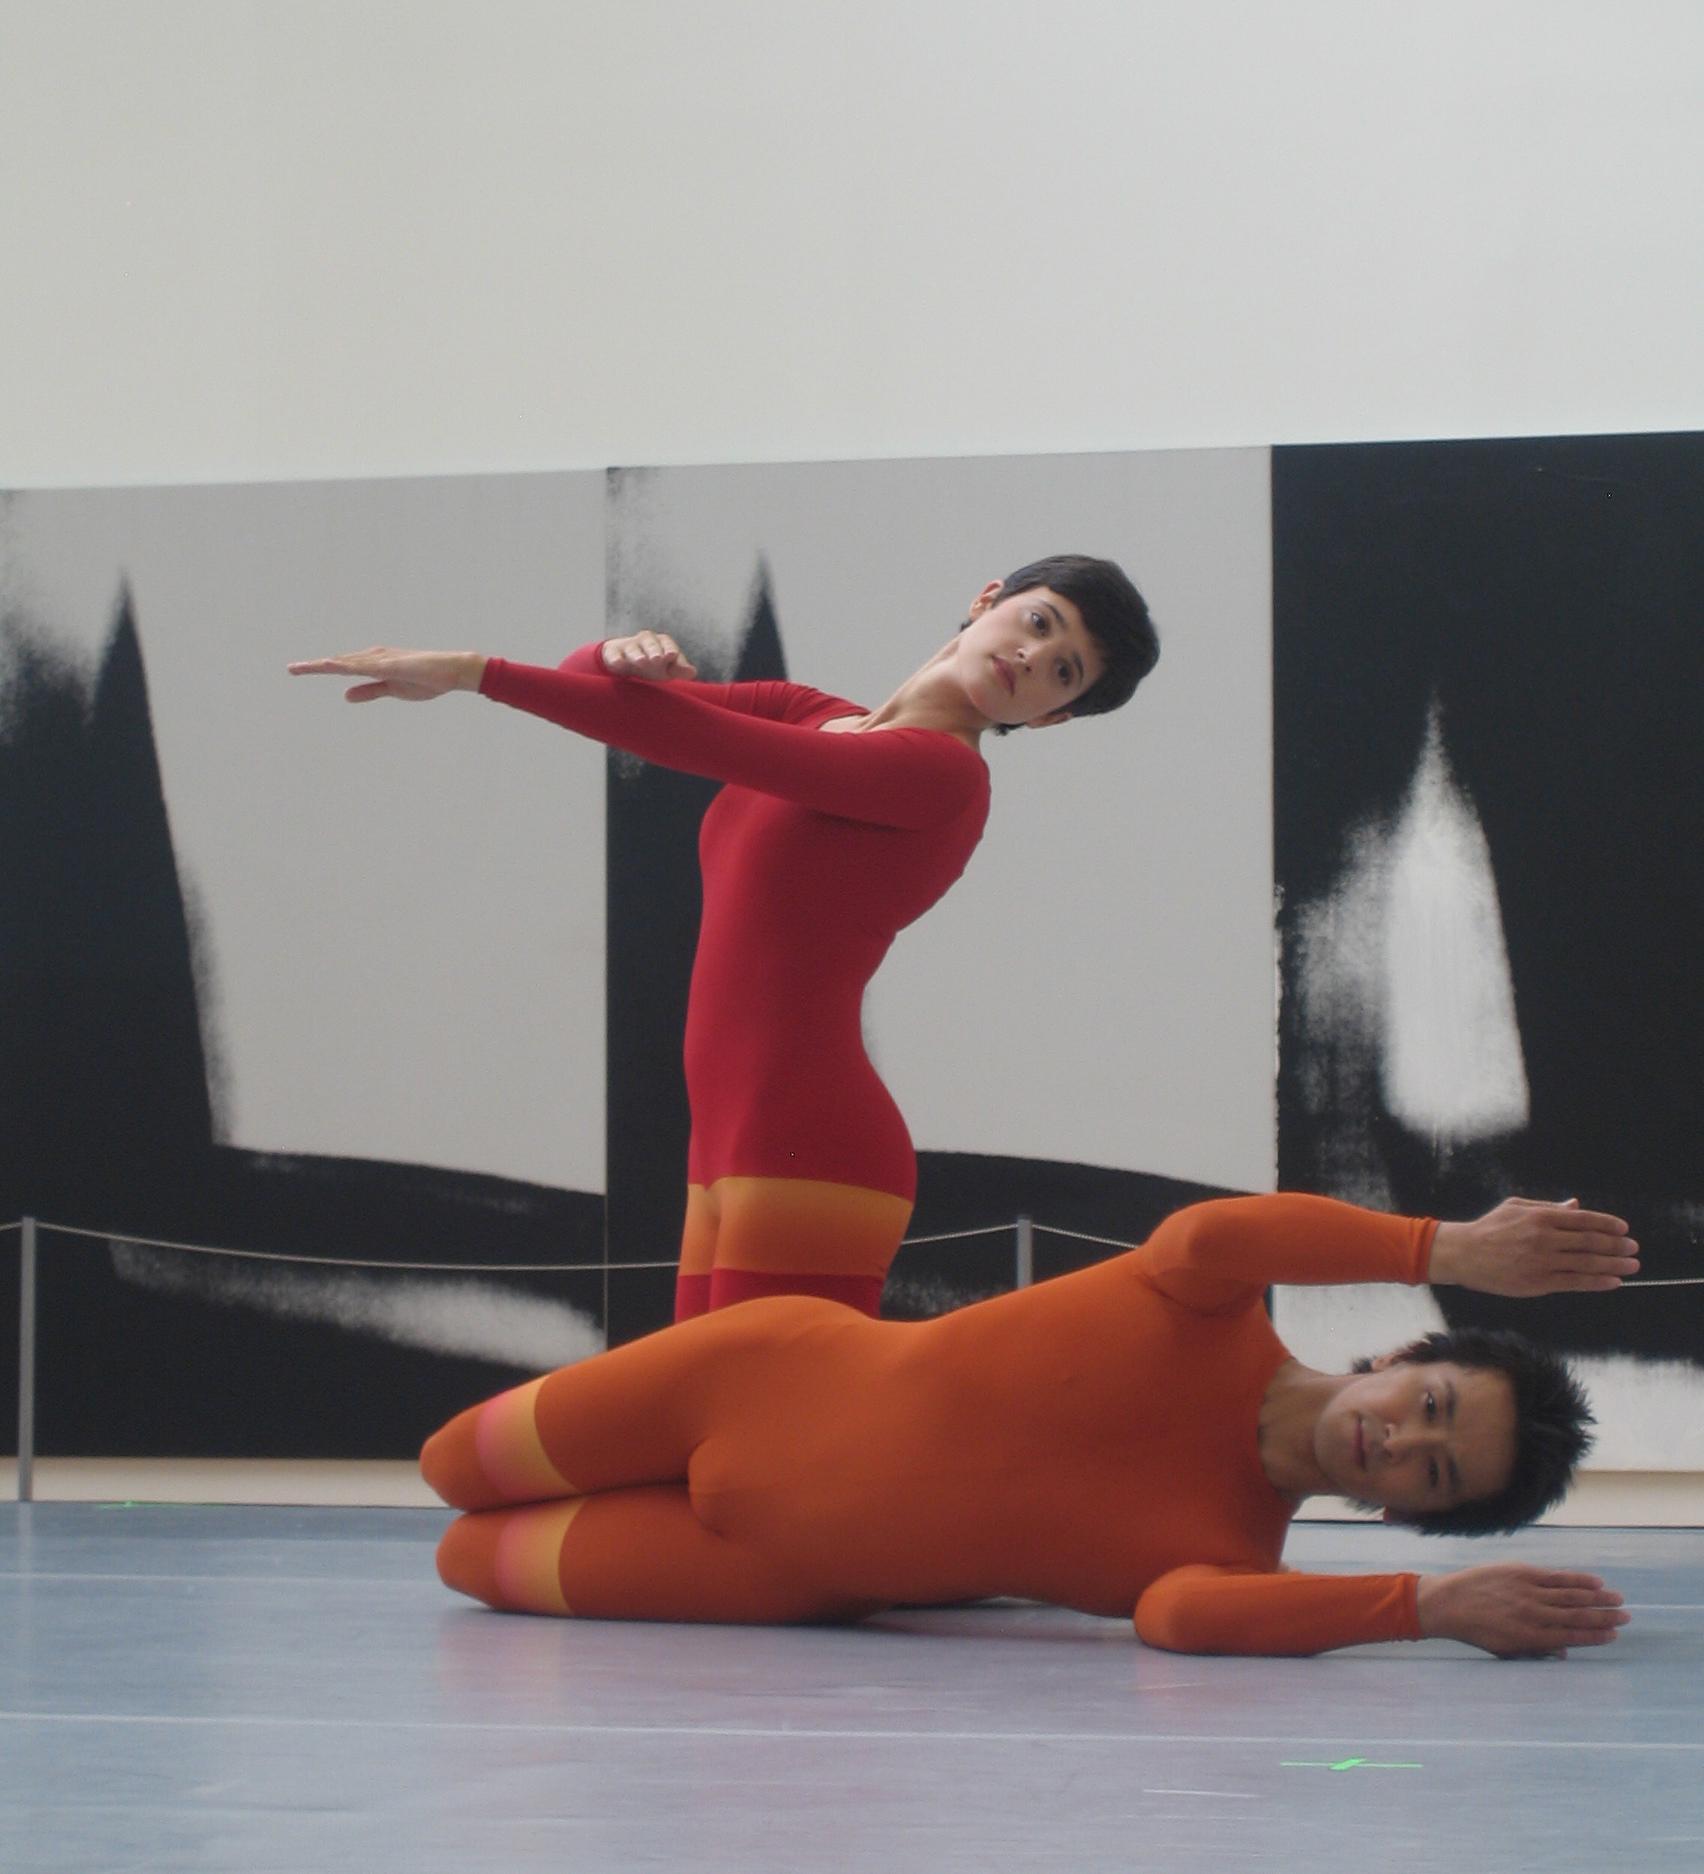 A woman in a red leotard on her knees and a man in an orange leotard lying on his side pose in front of a large, roped-off black-and-white artwork.